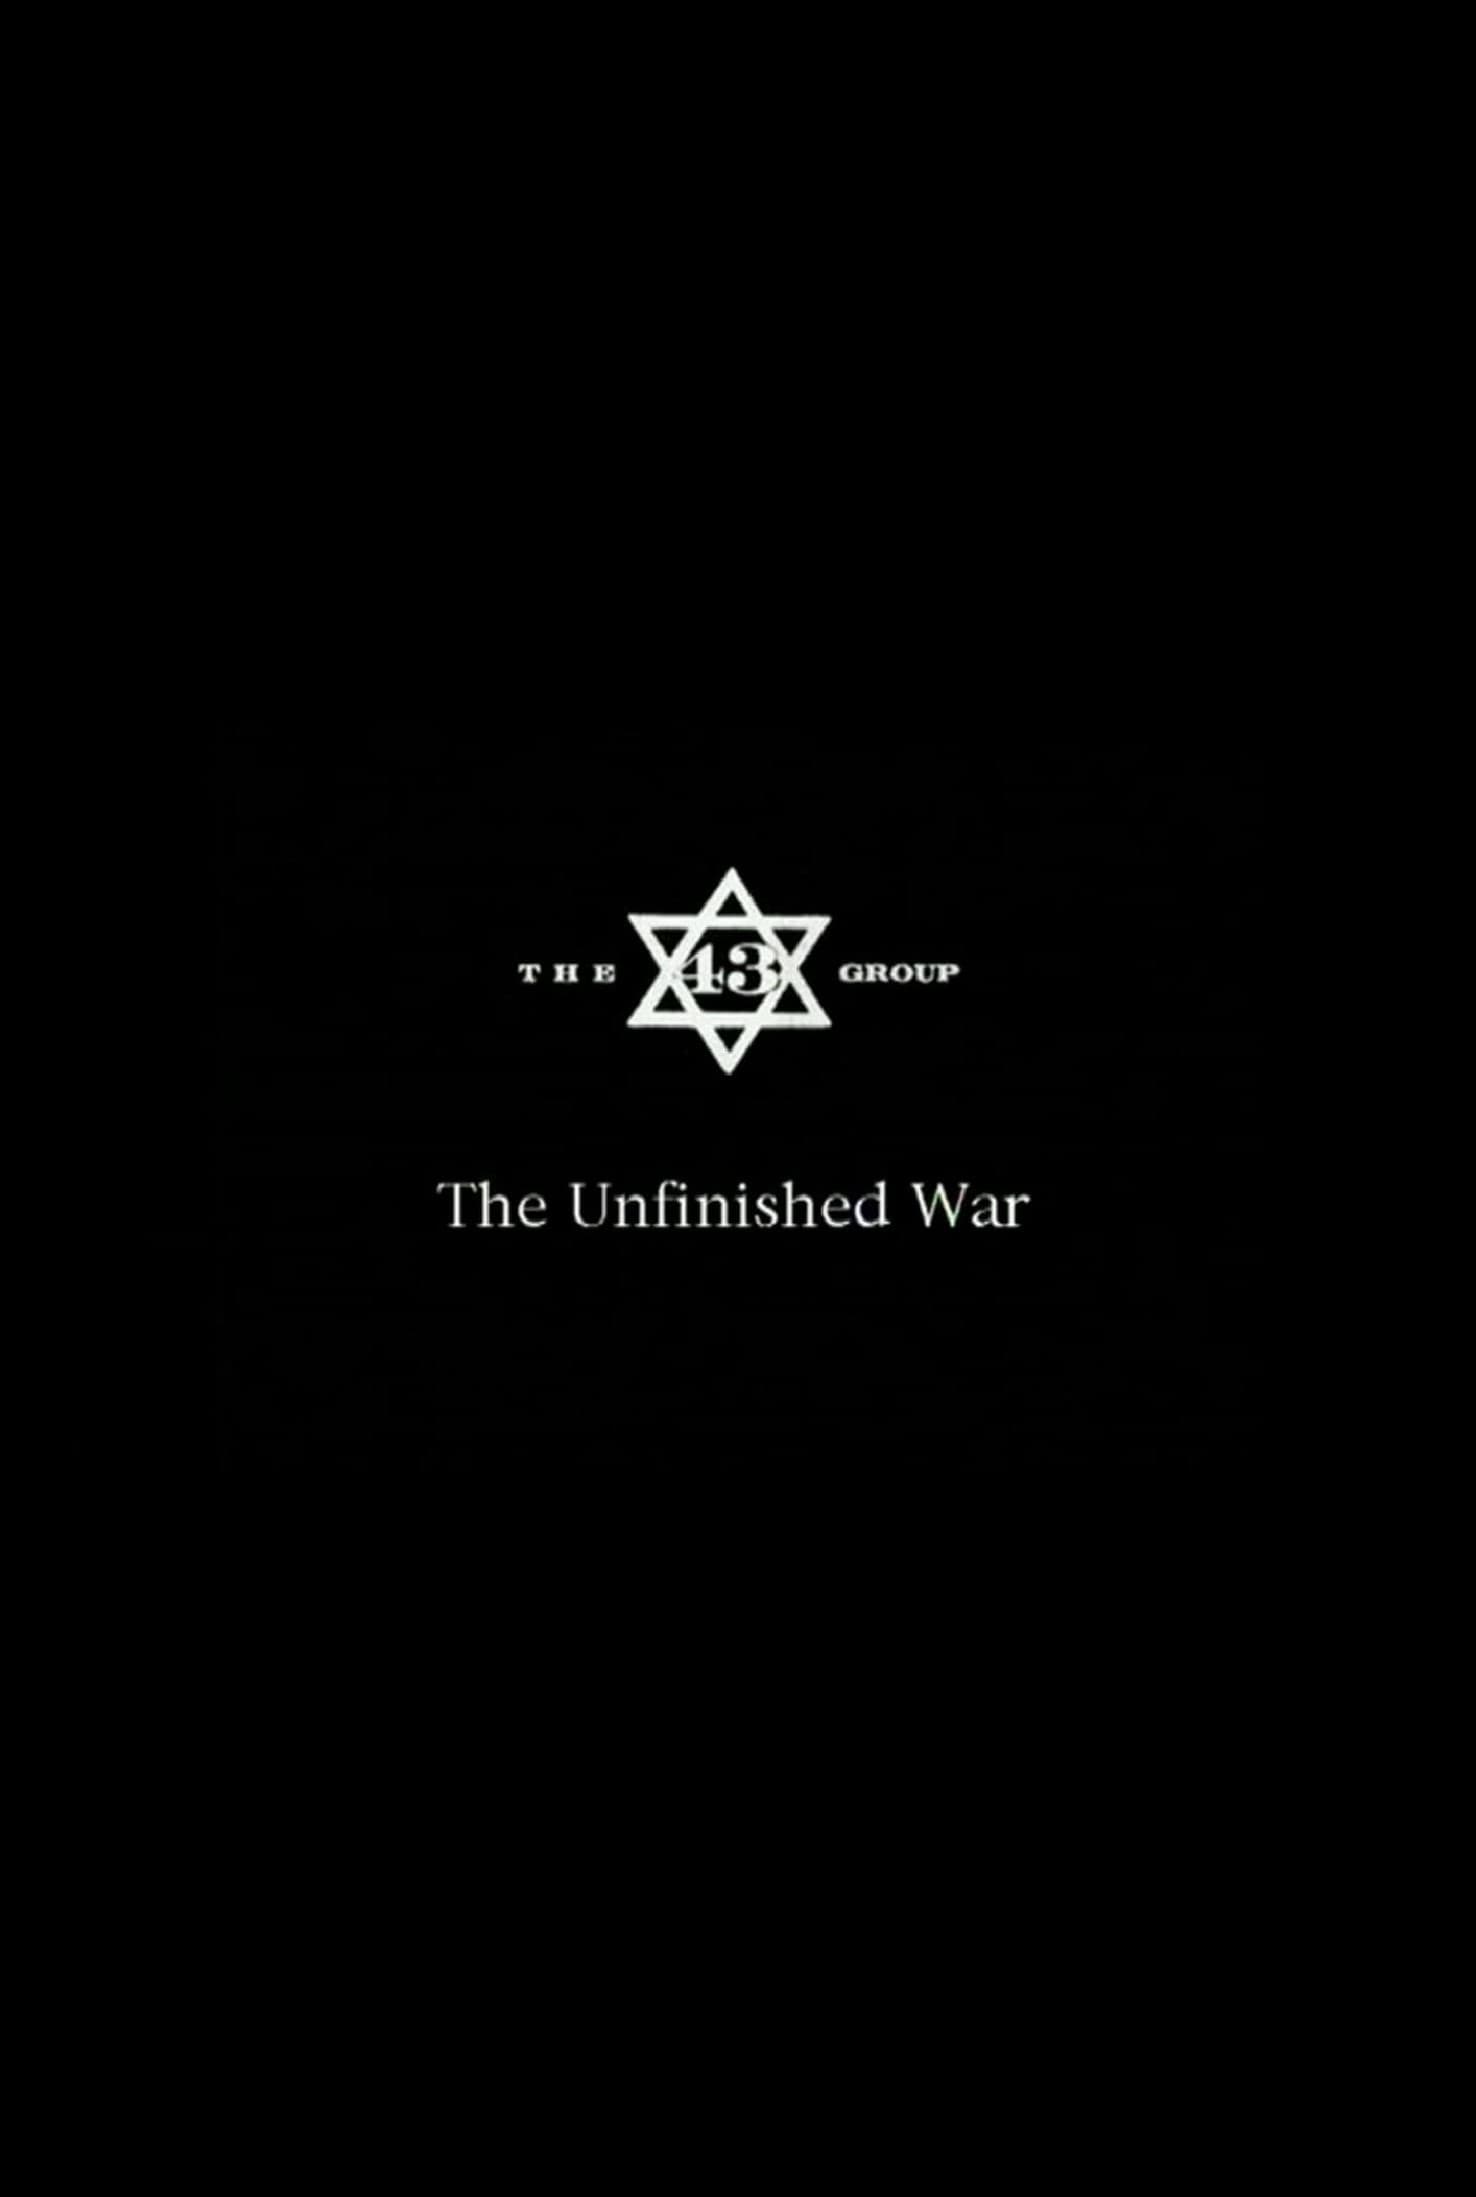 The 43 Group: The Unfinished War